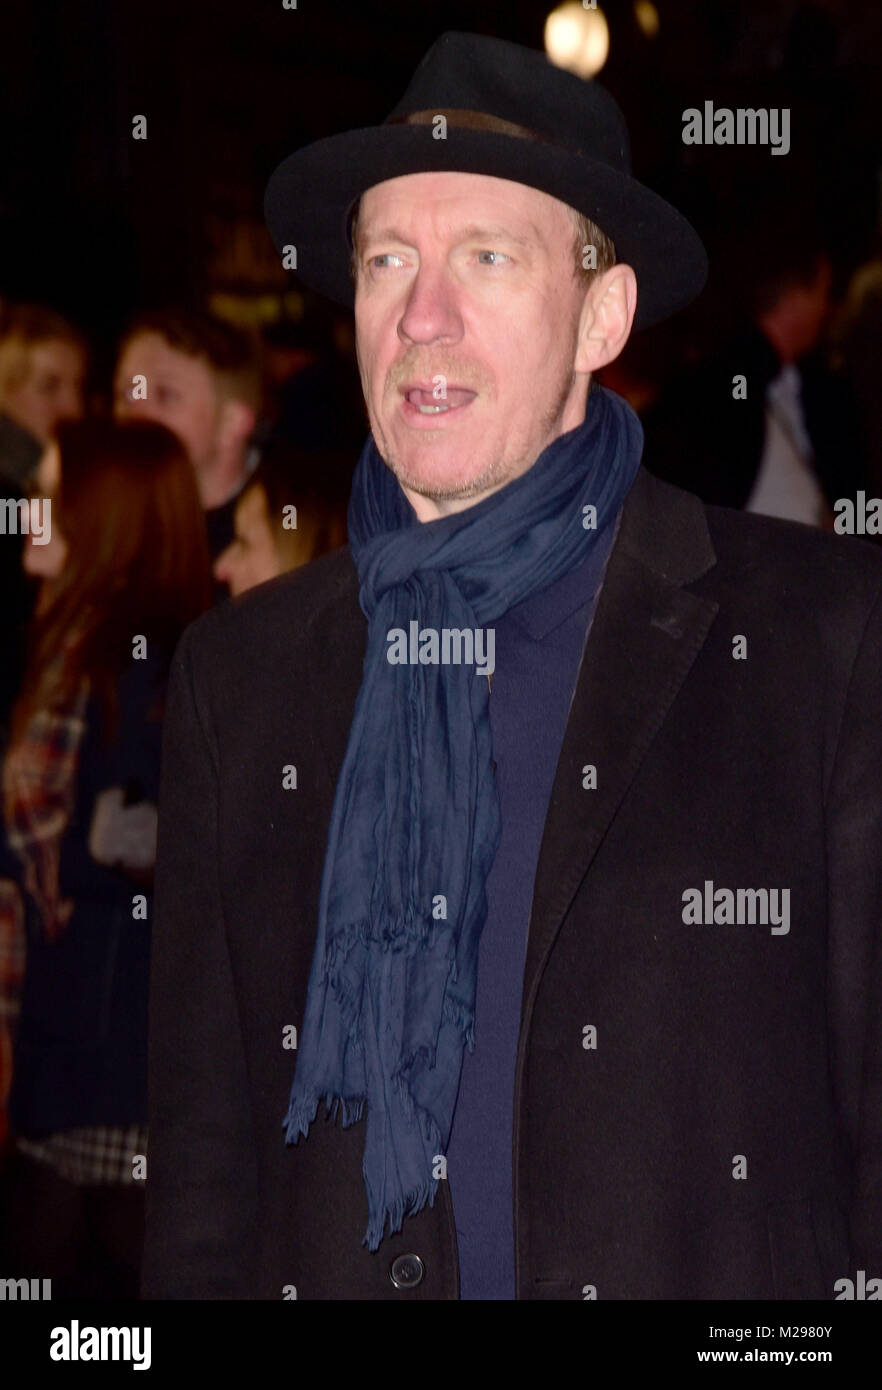 London, UK. 6th February, 2018. David Thewilis   attending The WORLD PREMIERE of THE MERCY  at the Curzon Mayfair  London Tuesday 6th February 2018 Credit: Peter Phillips/Alamy Live News Stock Photo